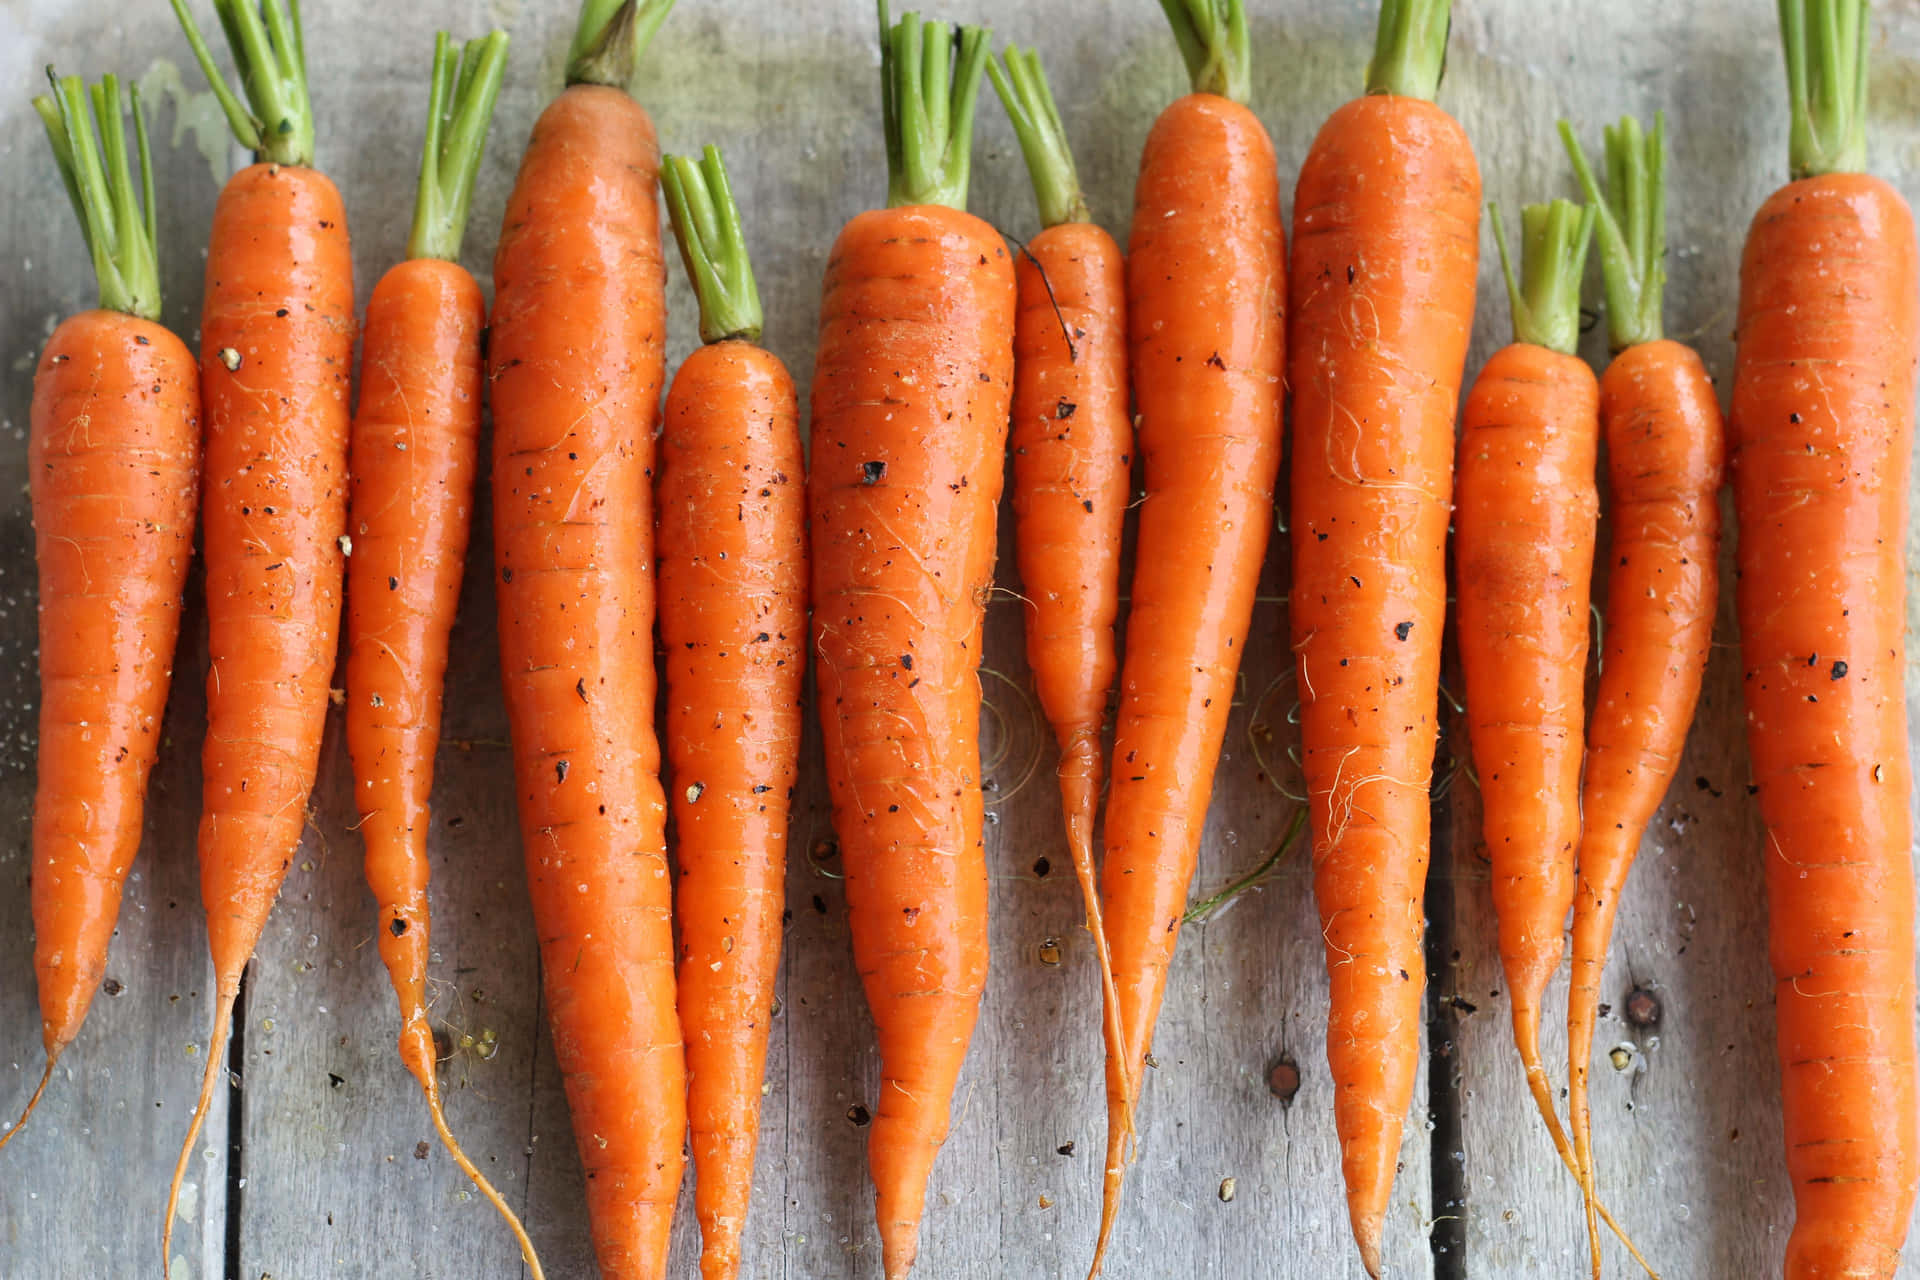 "Freshly picked carrots bursting with nutrition"